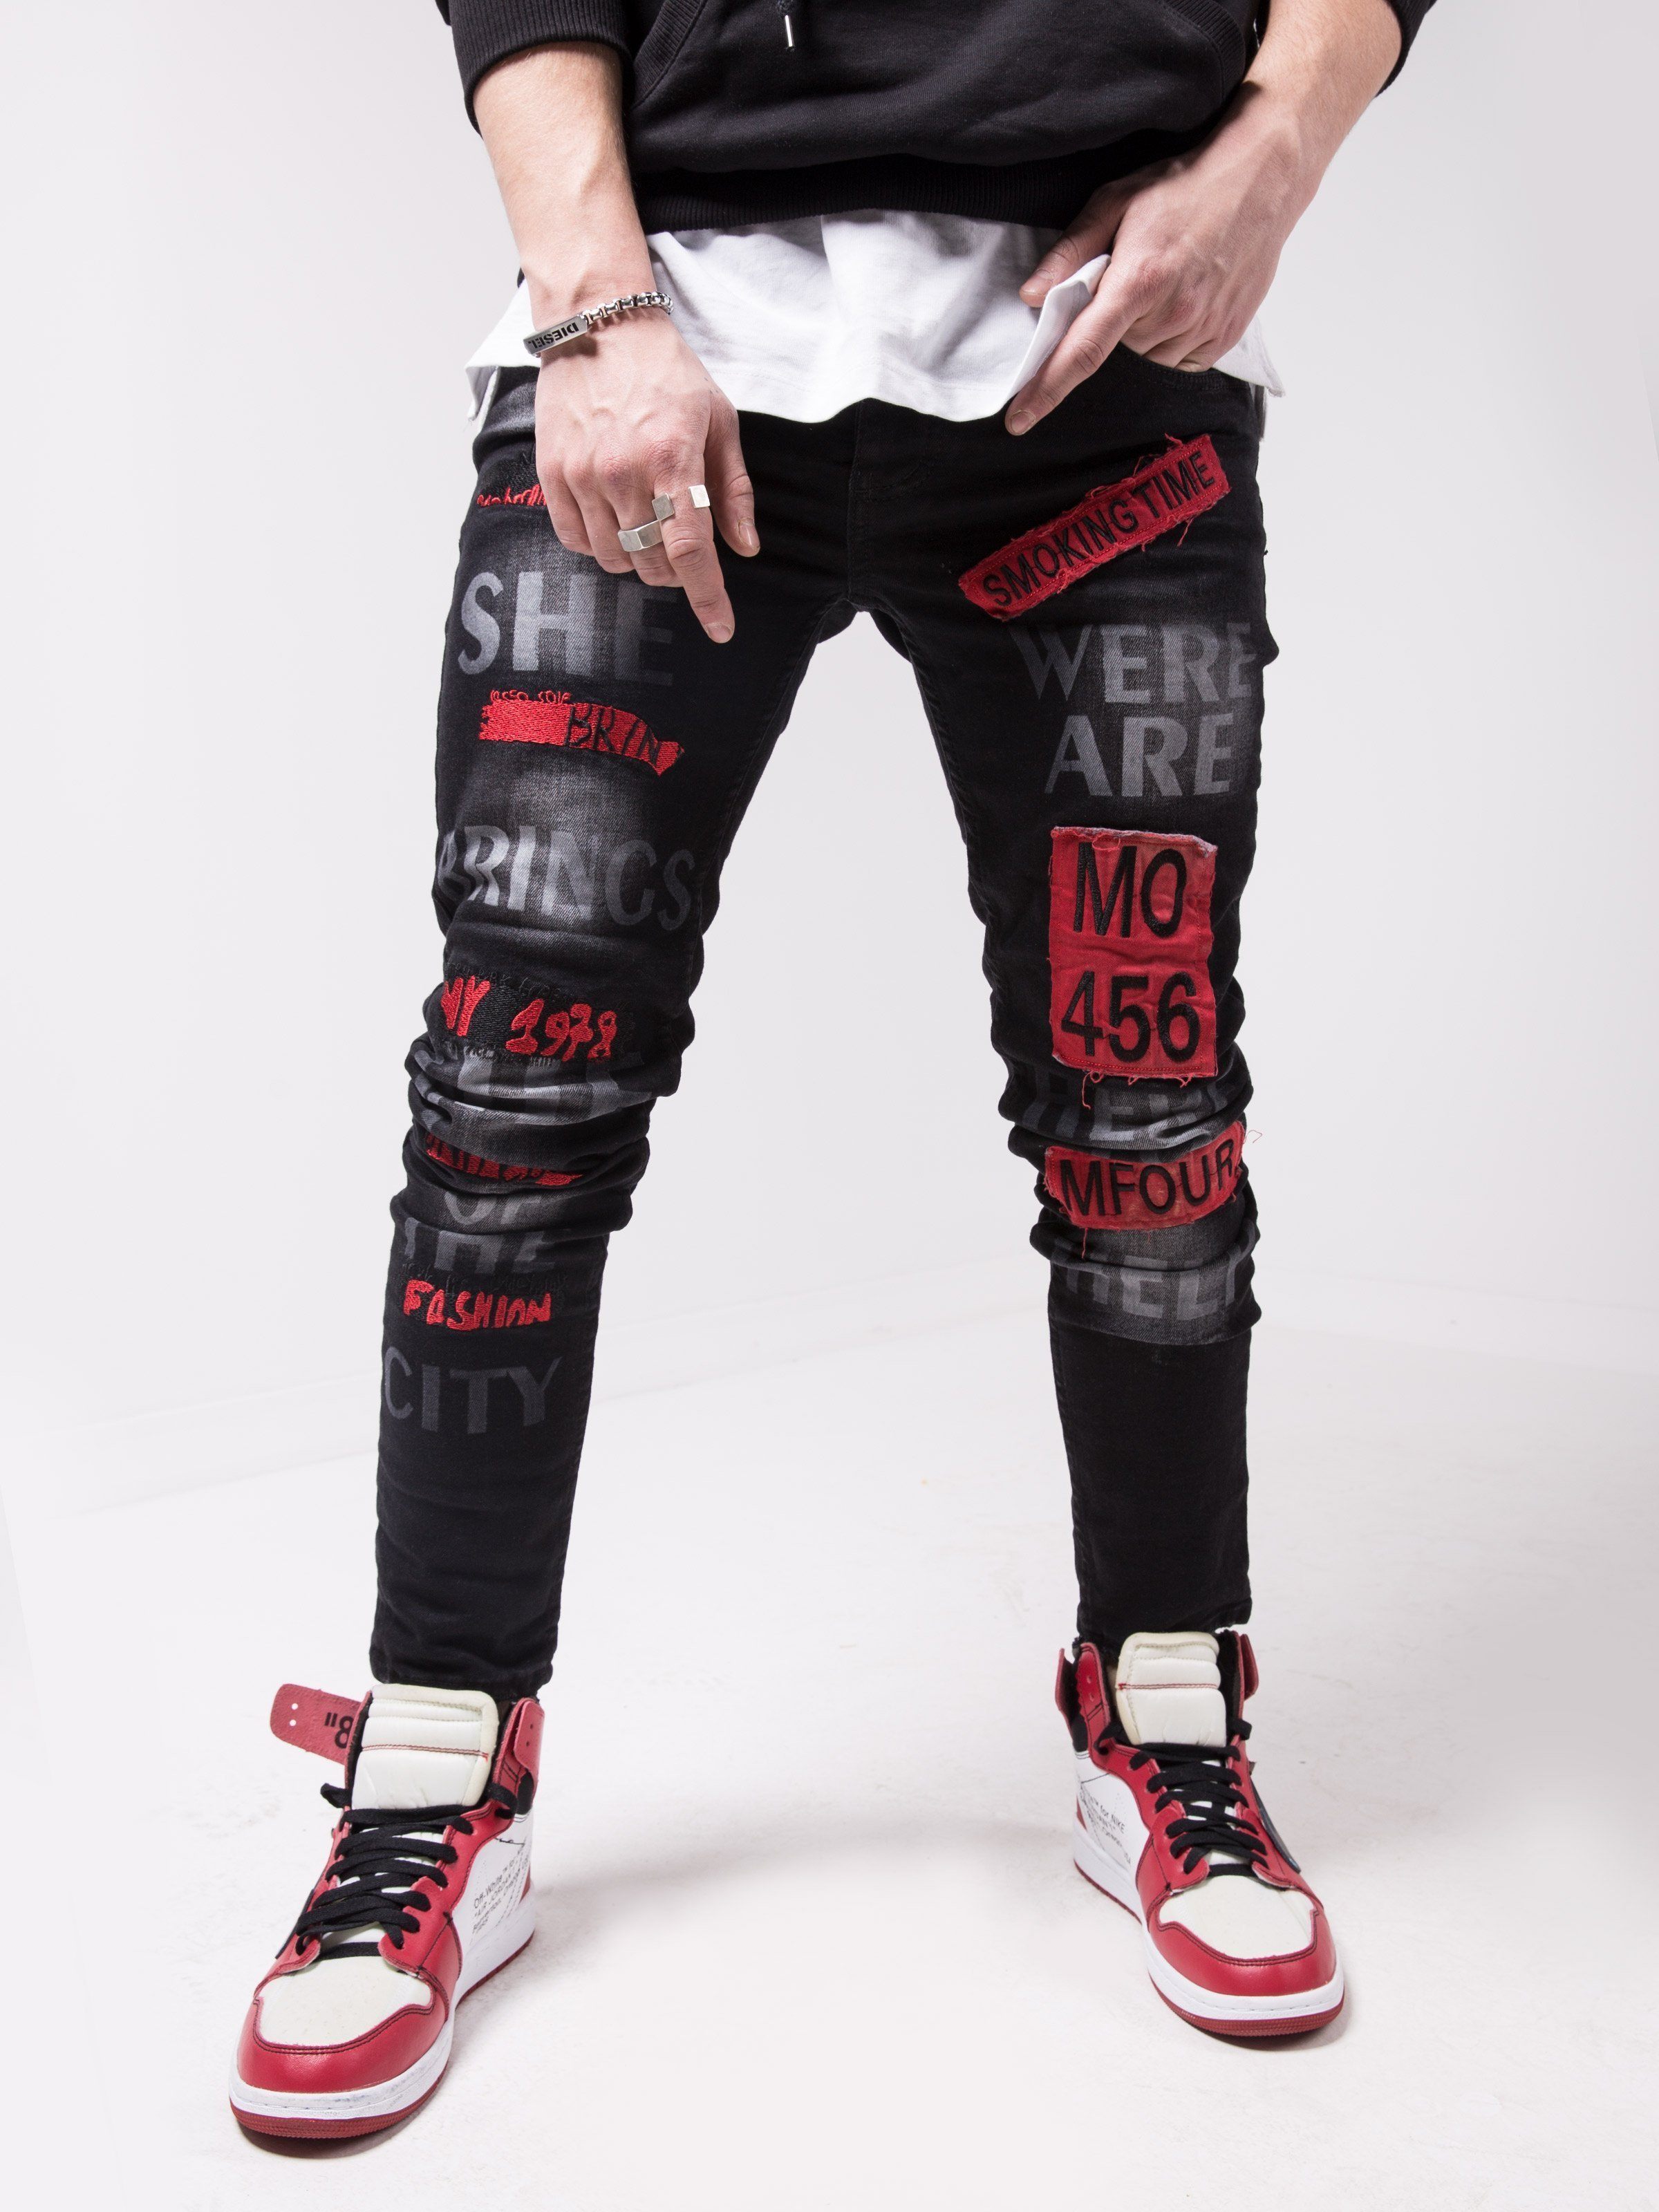 A man wearing a pair of GHETTO BIRD jeans with red and black stripes.